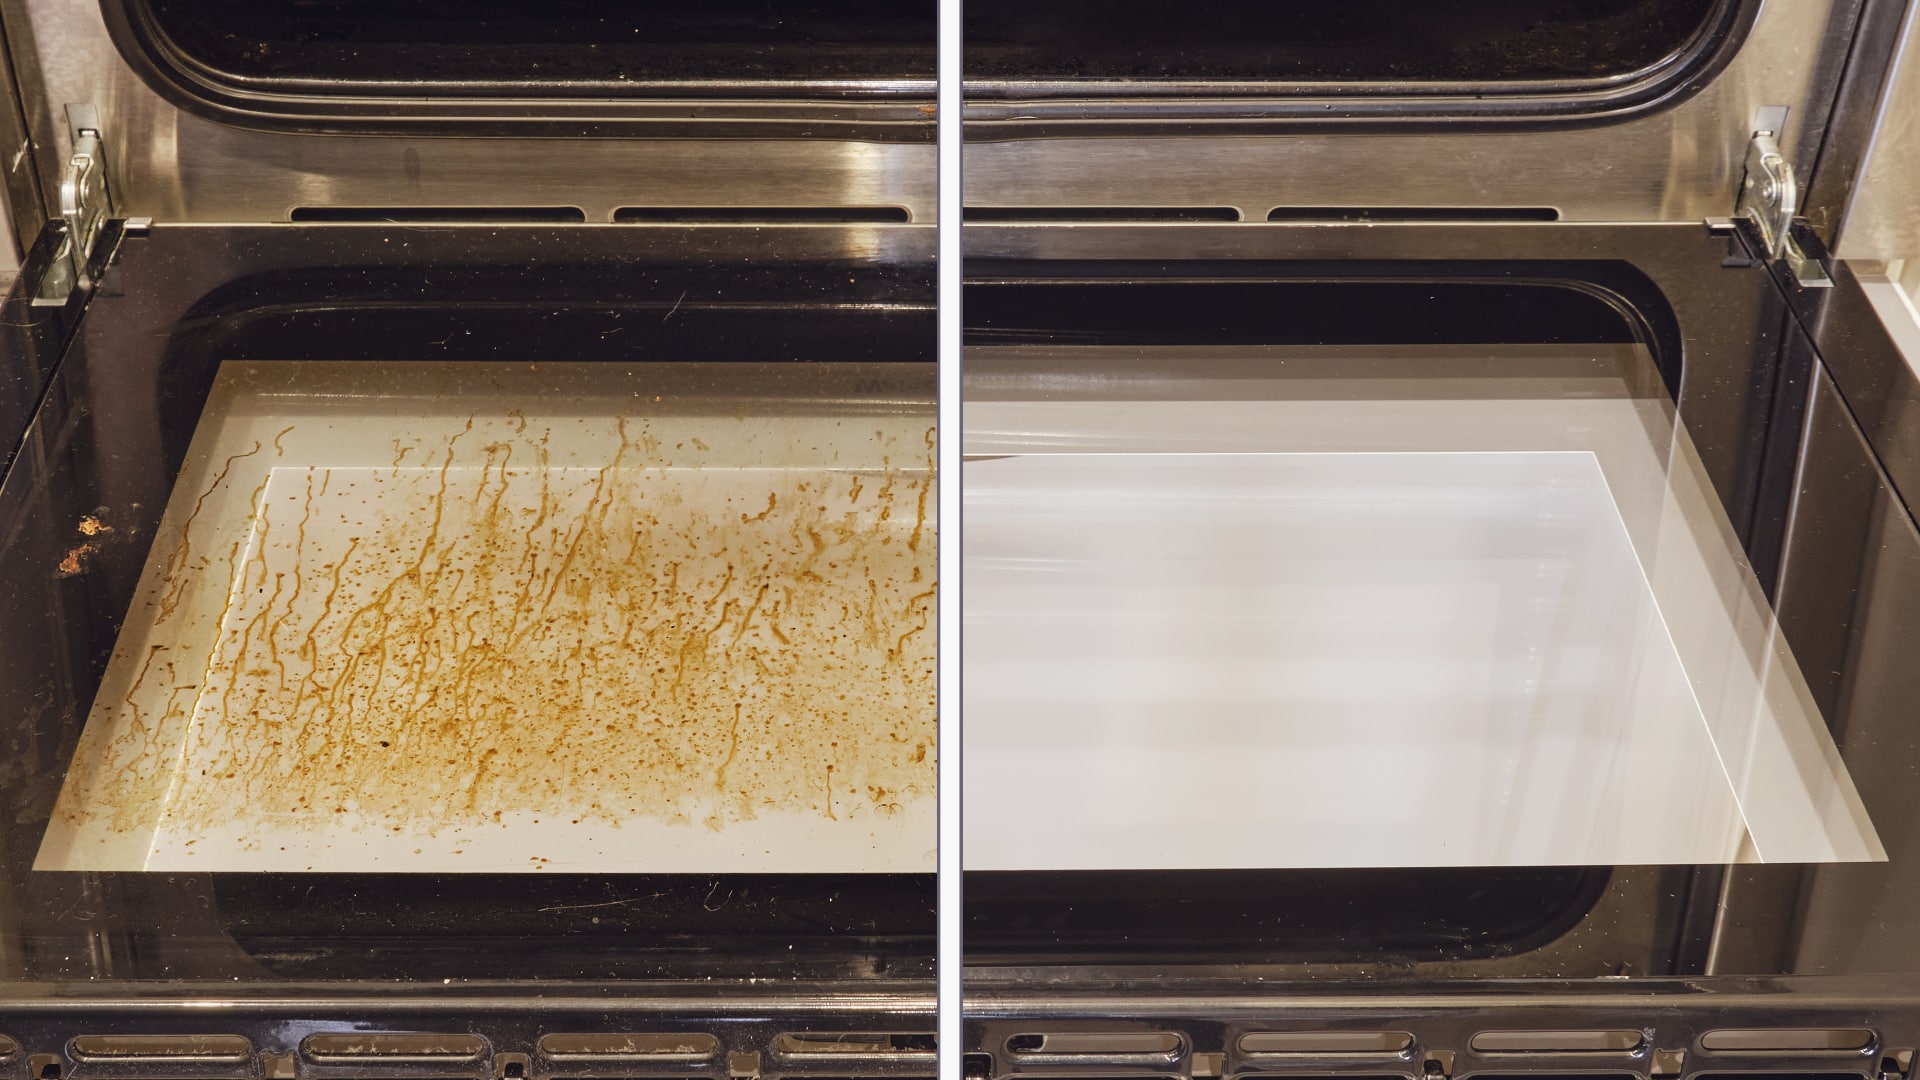 Clean Your Gas Range and Oven Without Chemicals